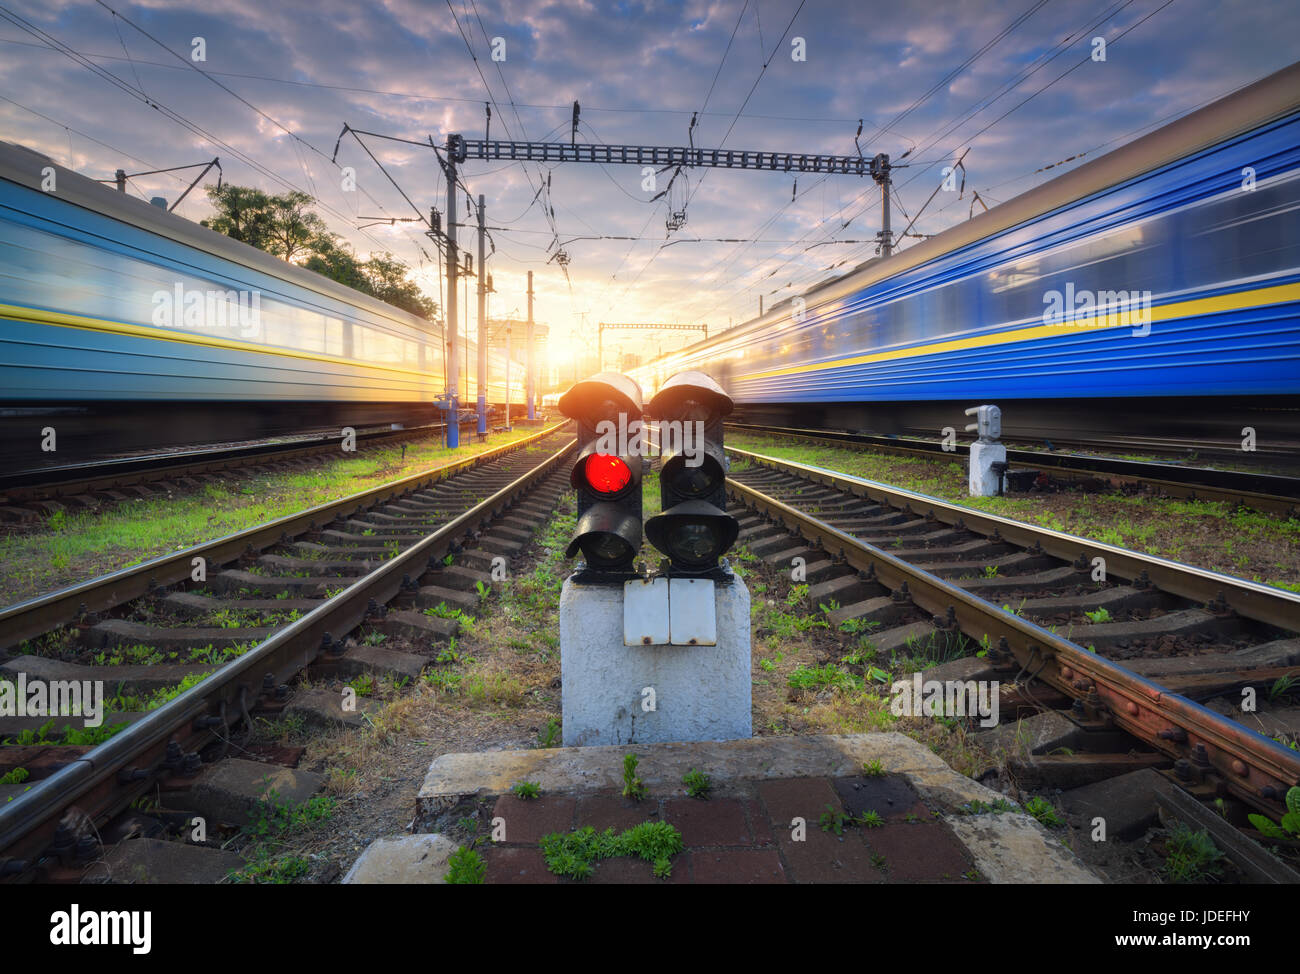 High speed passenger trains in motion on railroad track at sunset. Railway station with blurred modern commuter train, railway traffic light, blue clo Stock Photo